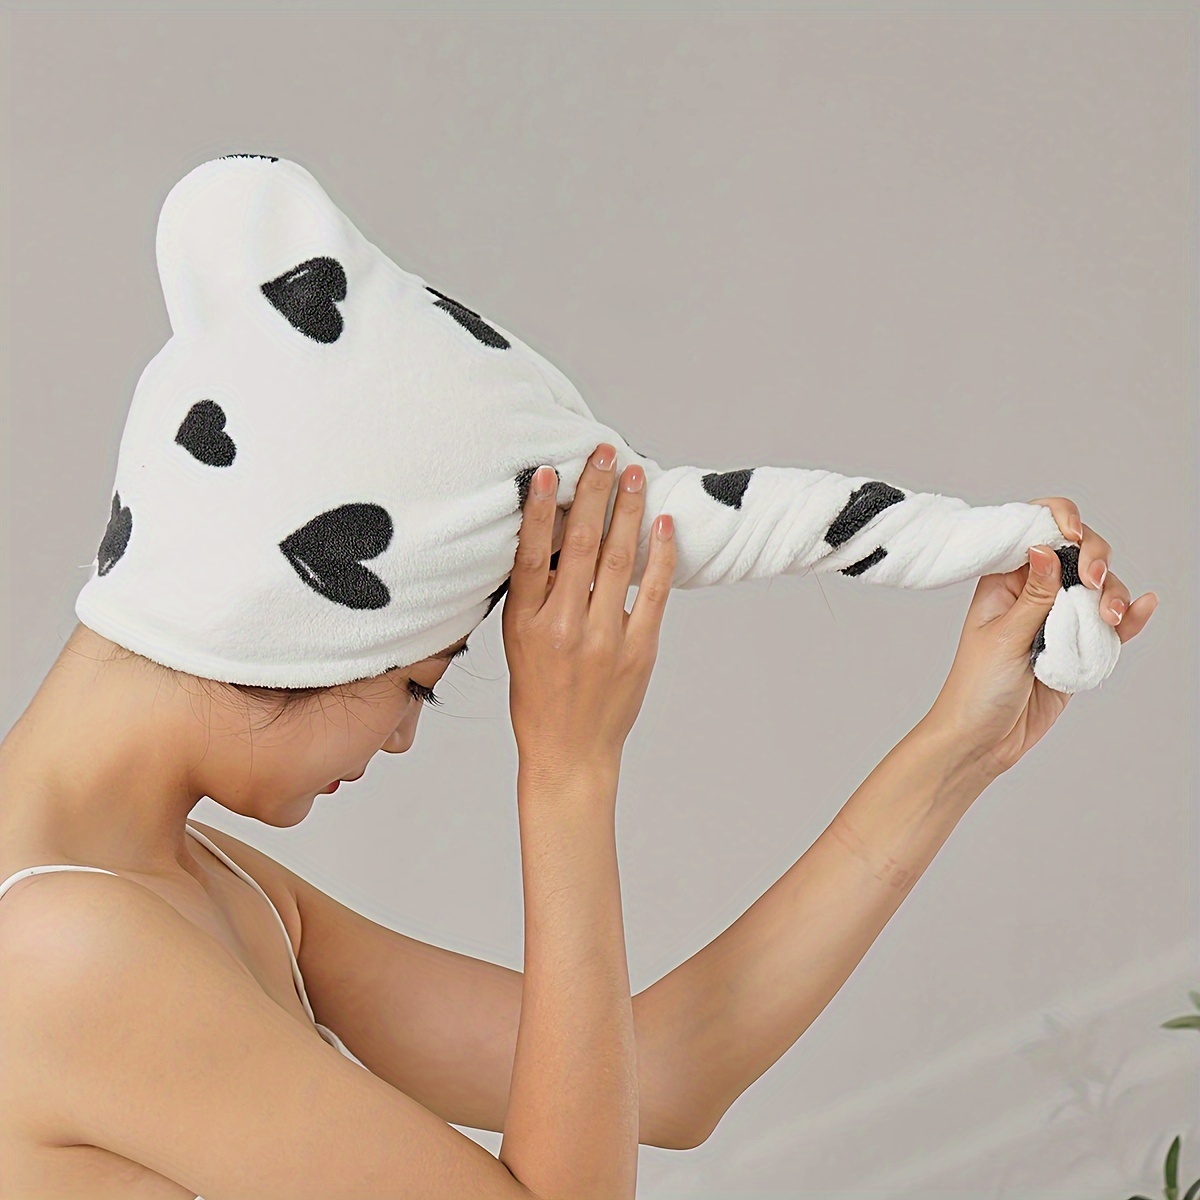 

1pc Cow Printed Hair Wrap Towel, Absorbent & Quick-drying Lady's Turban, Super Soft Dry Hair Cap, For Long & Short Hair, Ideal Bathroom Supplies